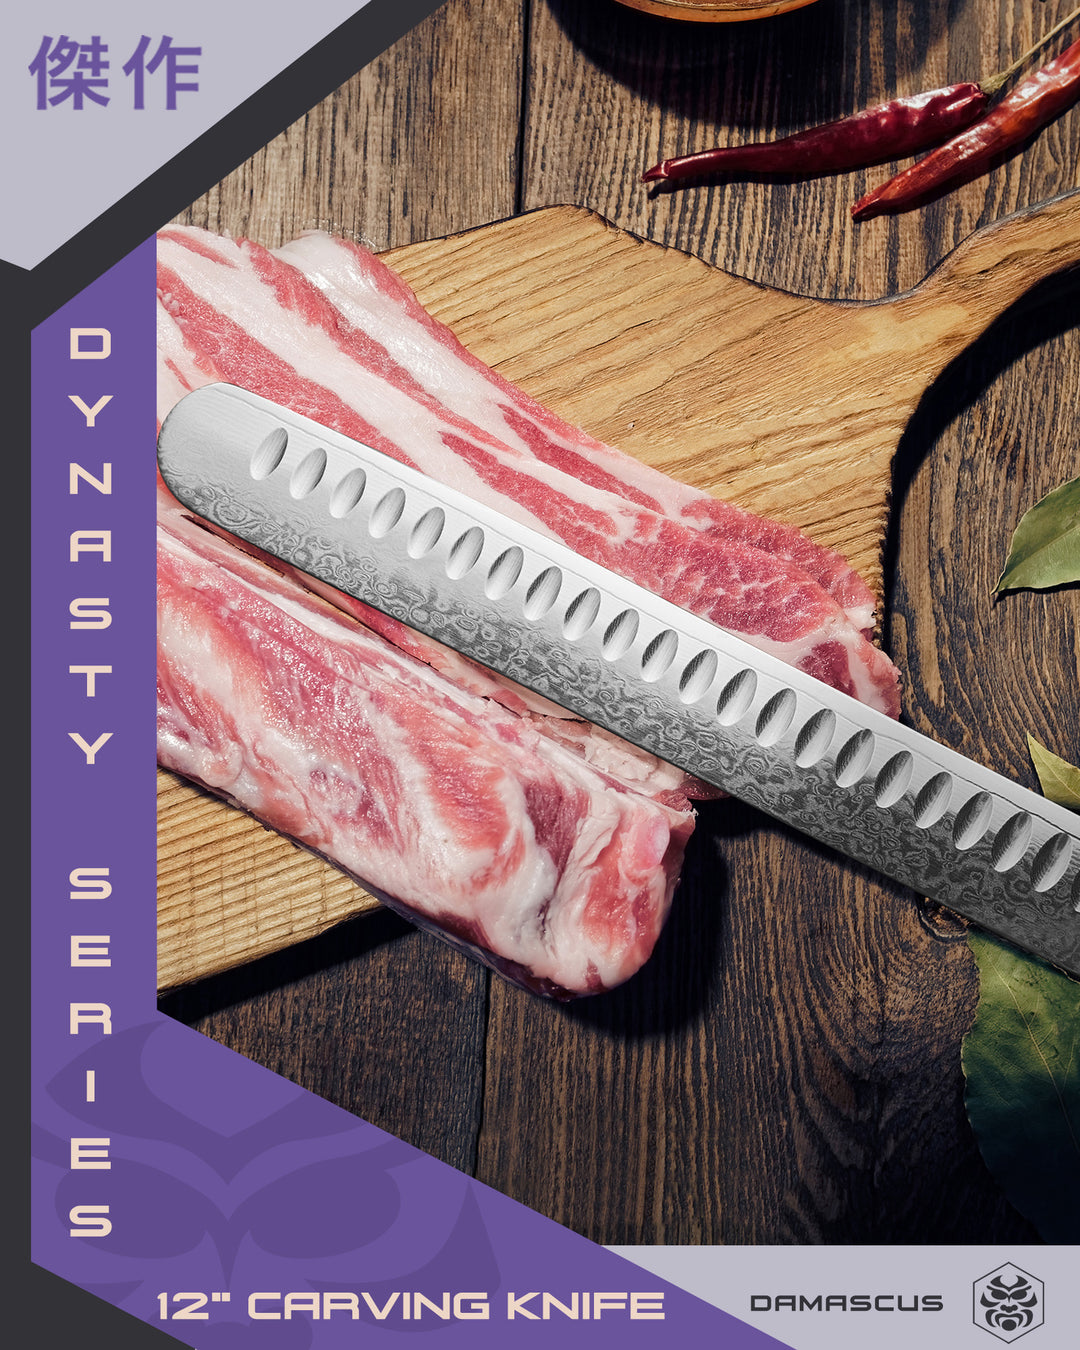 The Dynasty Damascus Carving Knife after slicing bacon